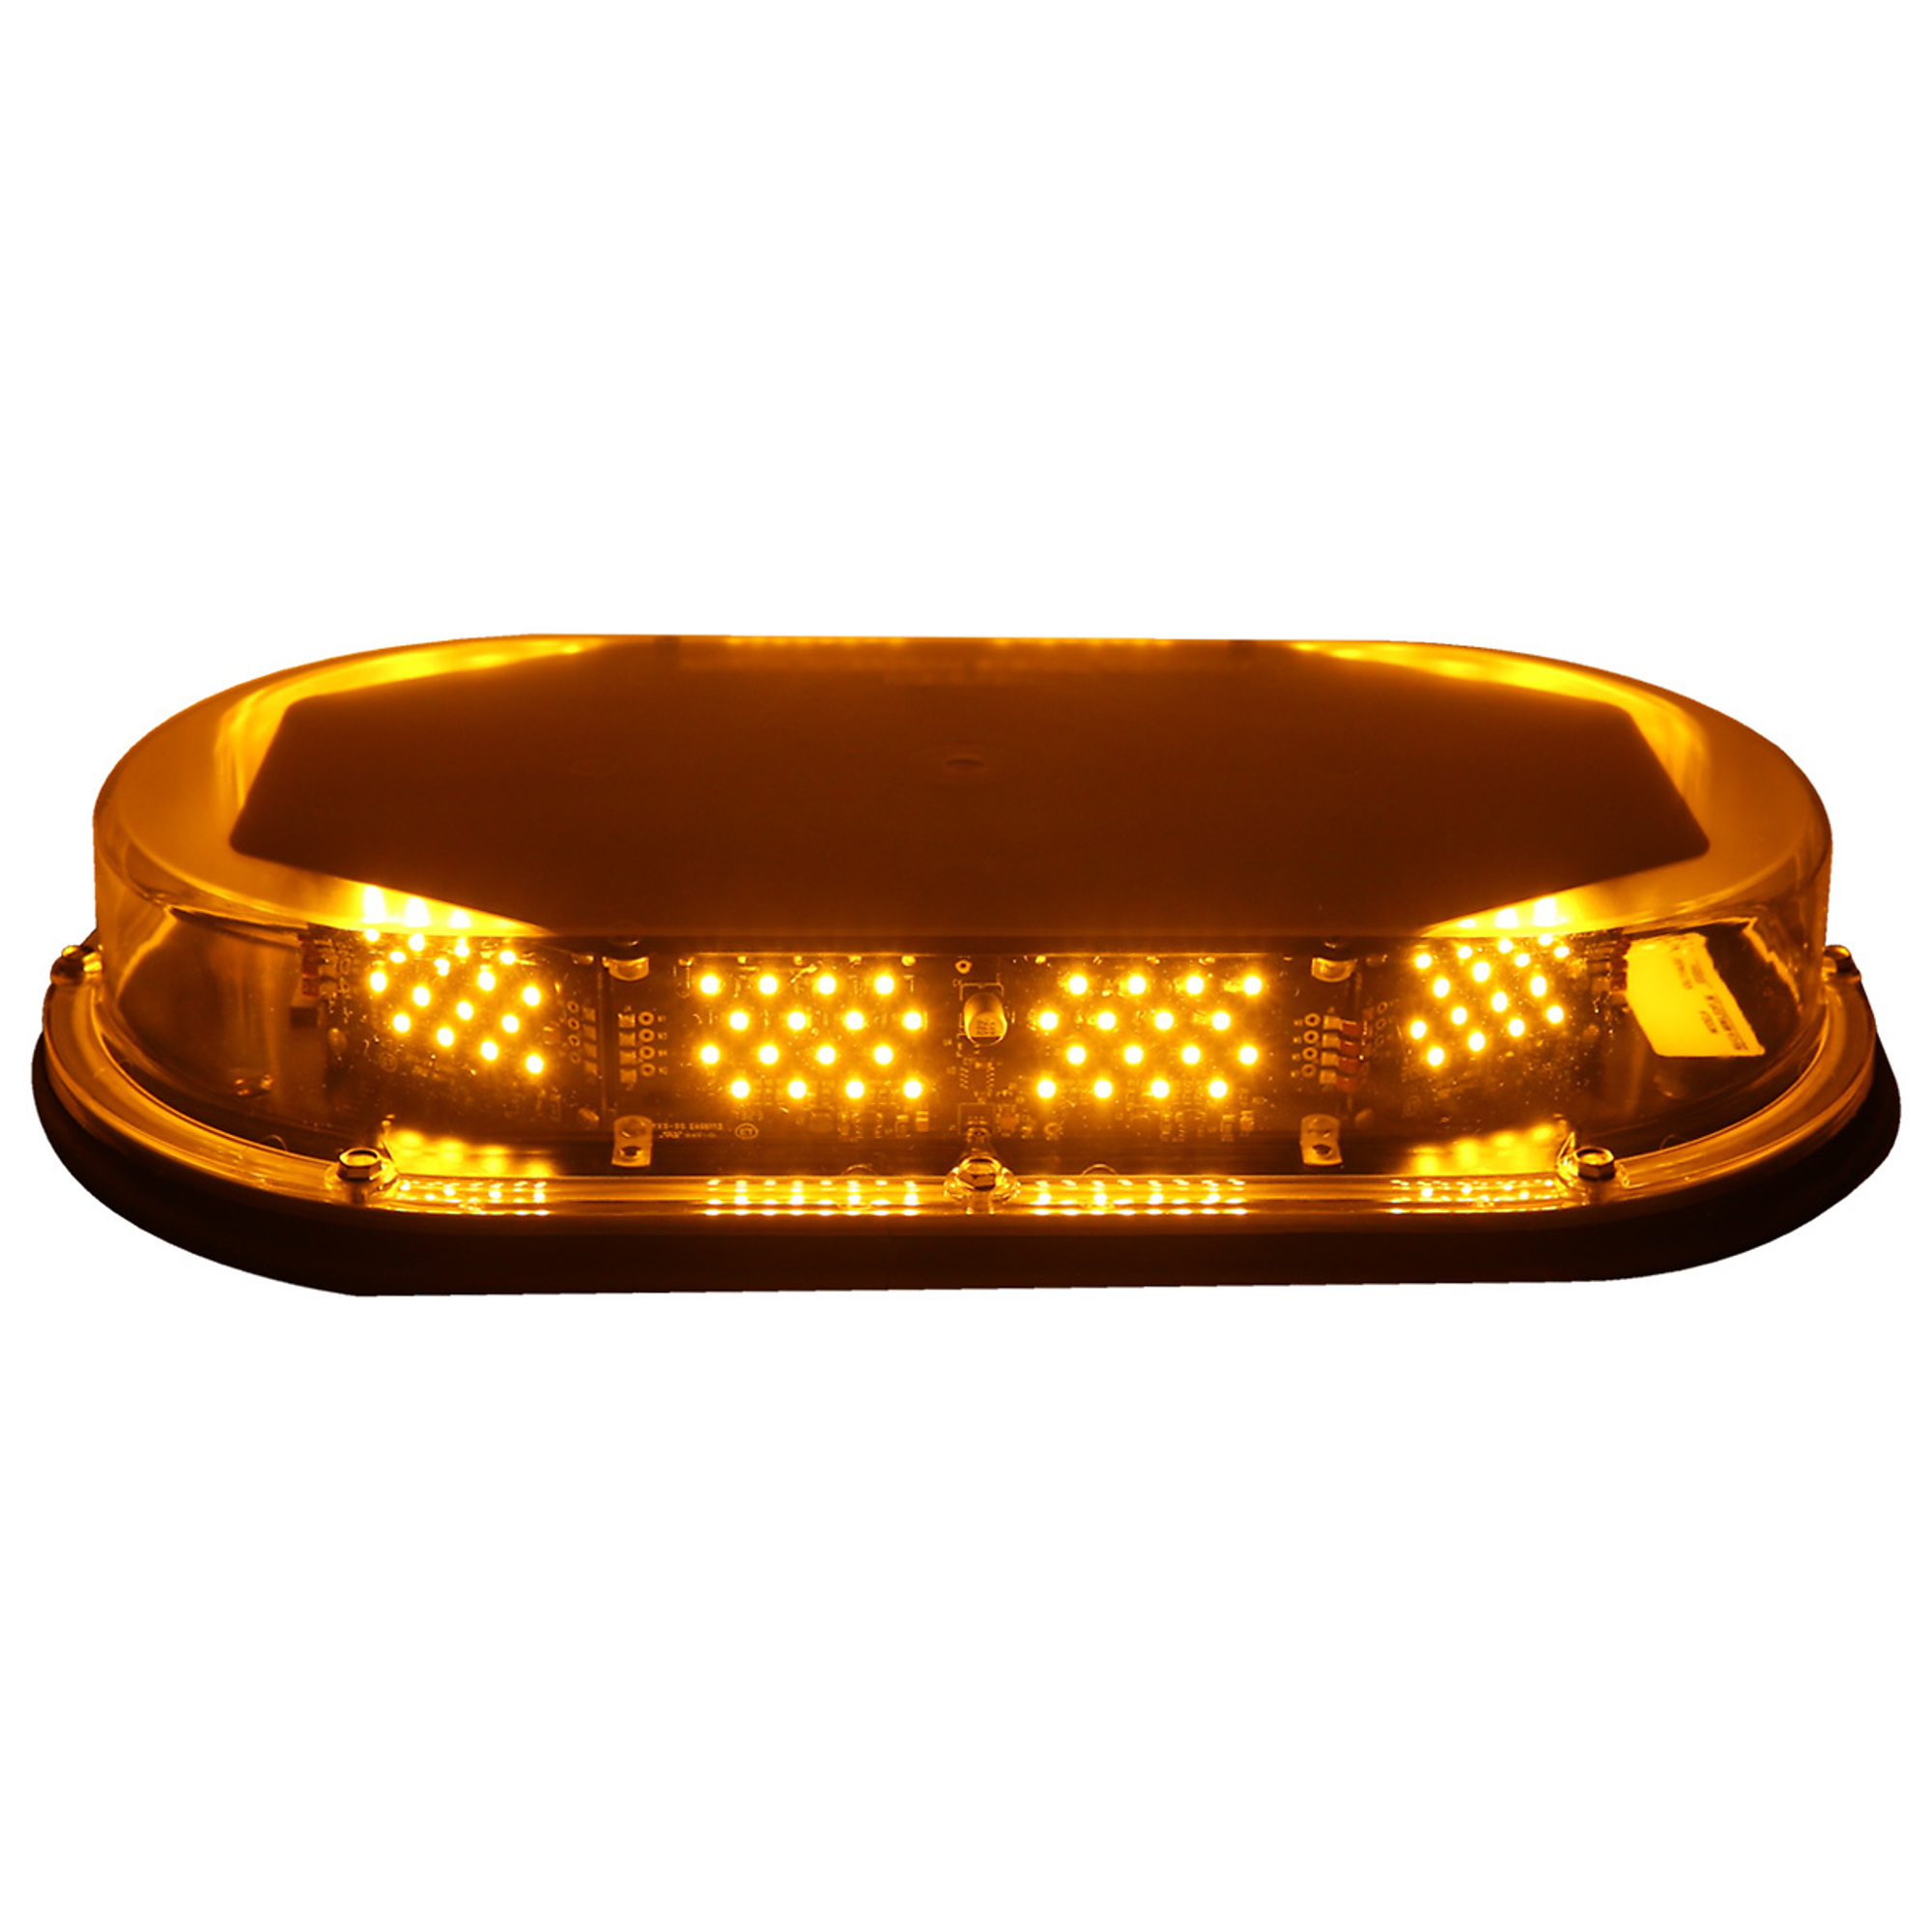 Race Sport Lighting, 10-Cluster Low-Profile LED Beacon - SAE Class 1 Light Type LED, Lens Color Clear, Included (qty.) 1 Model 1004280